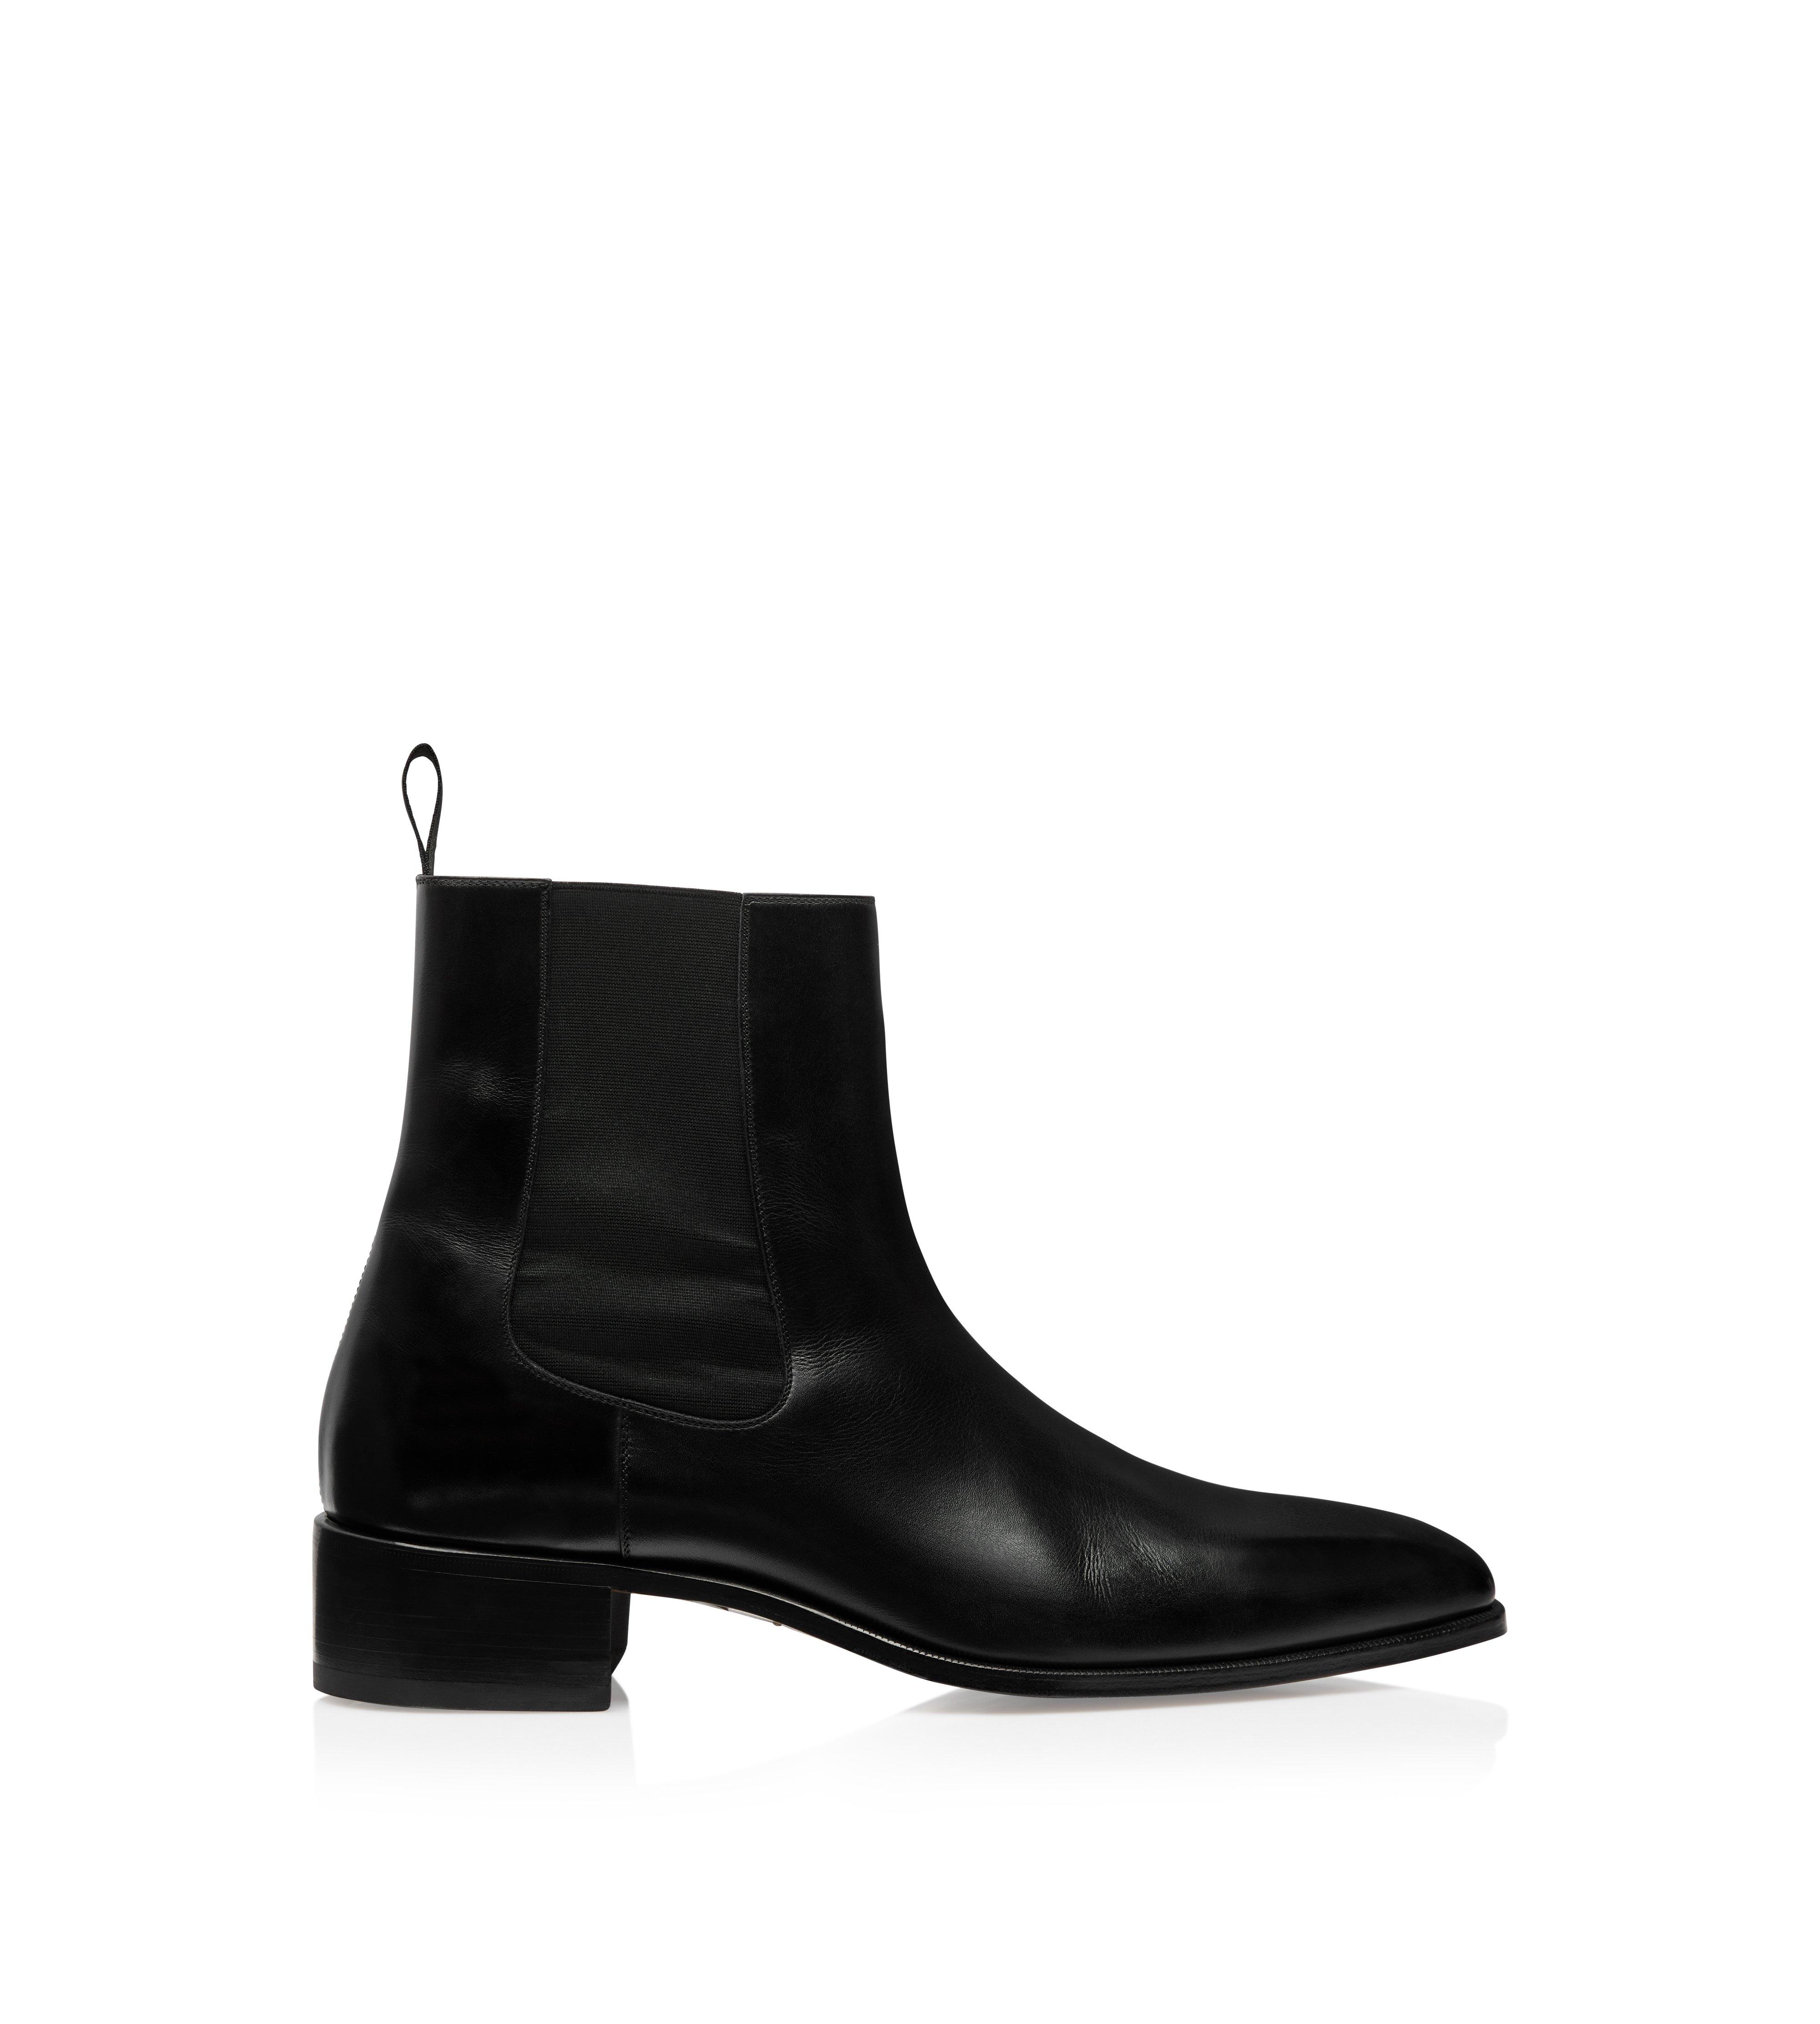 Boots - Men's Boots | TomFord.co.uk